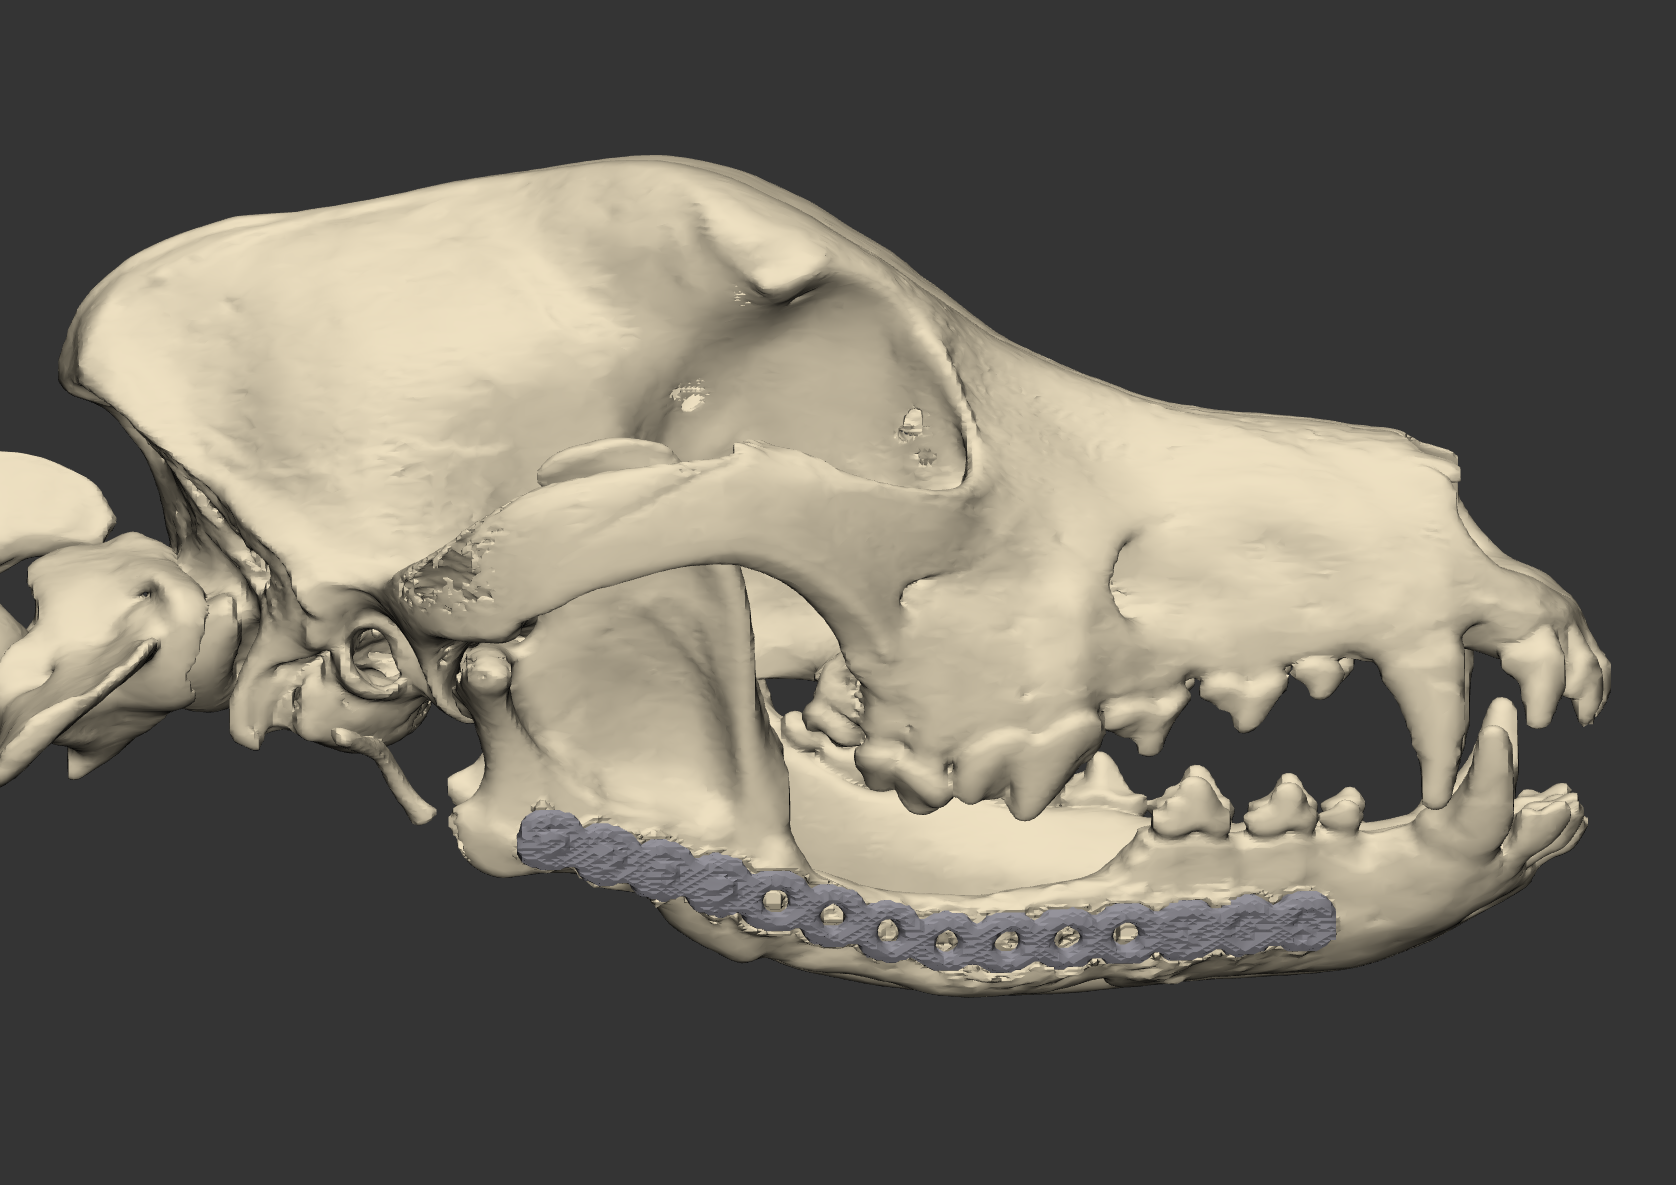 Canine mandible with reconstruction plate